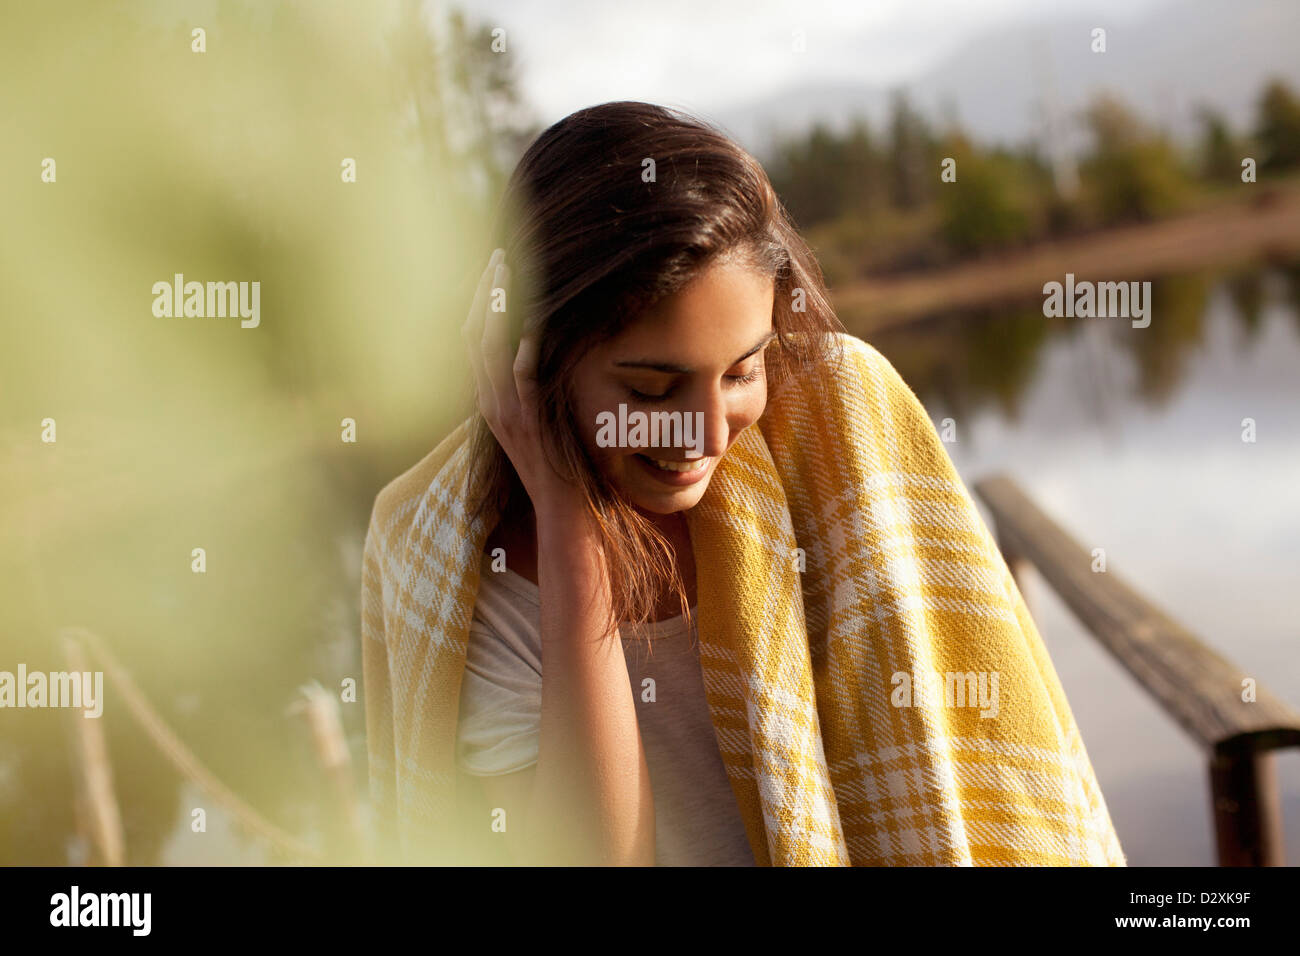 Smiling woman wrapped in blanket at lakeside Banque D'Images